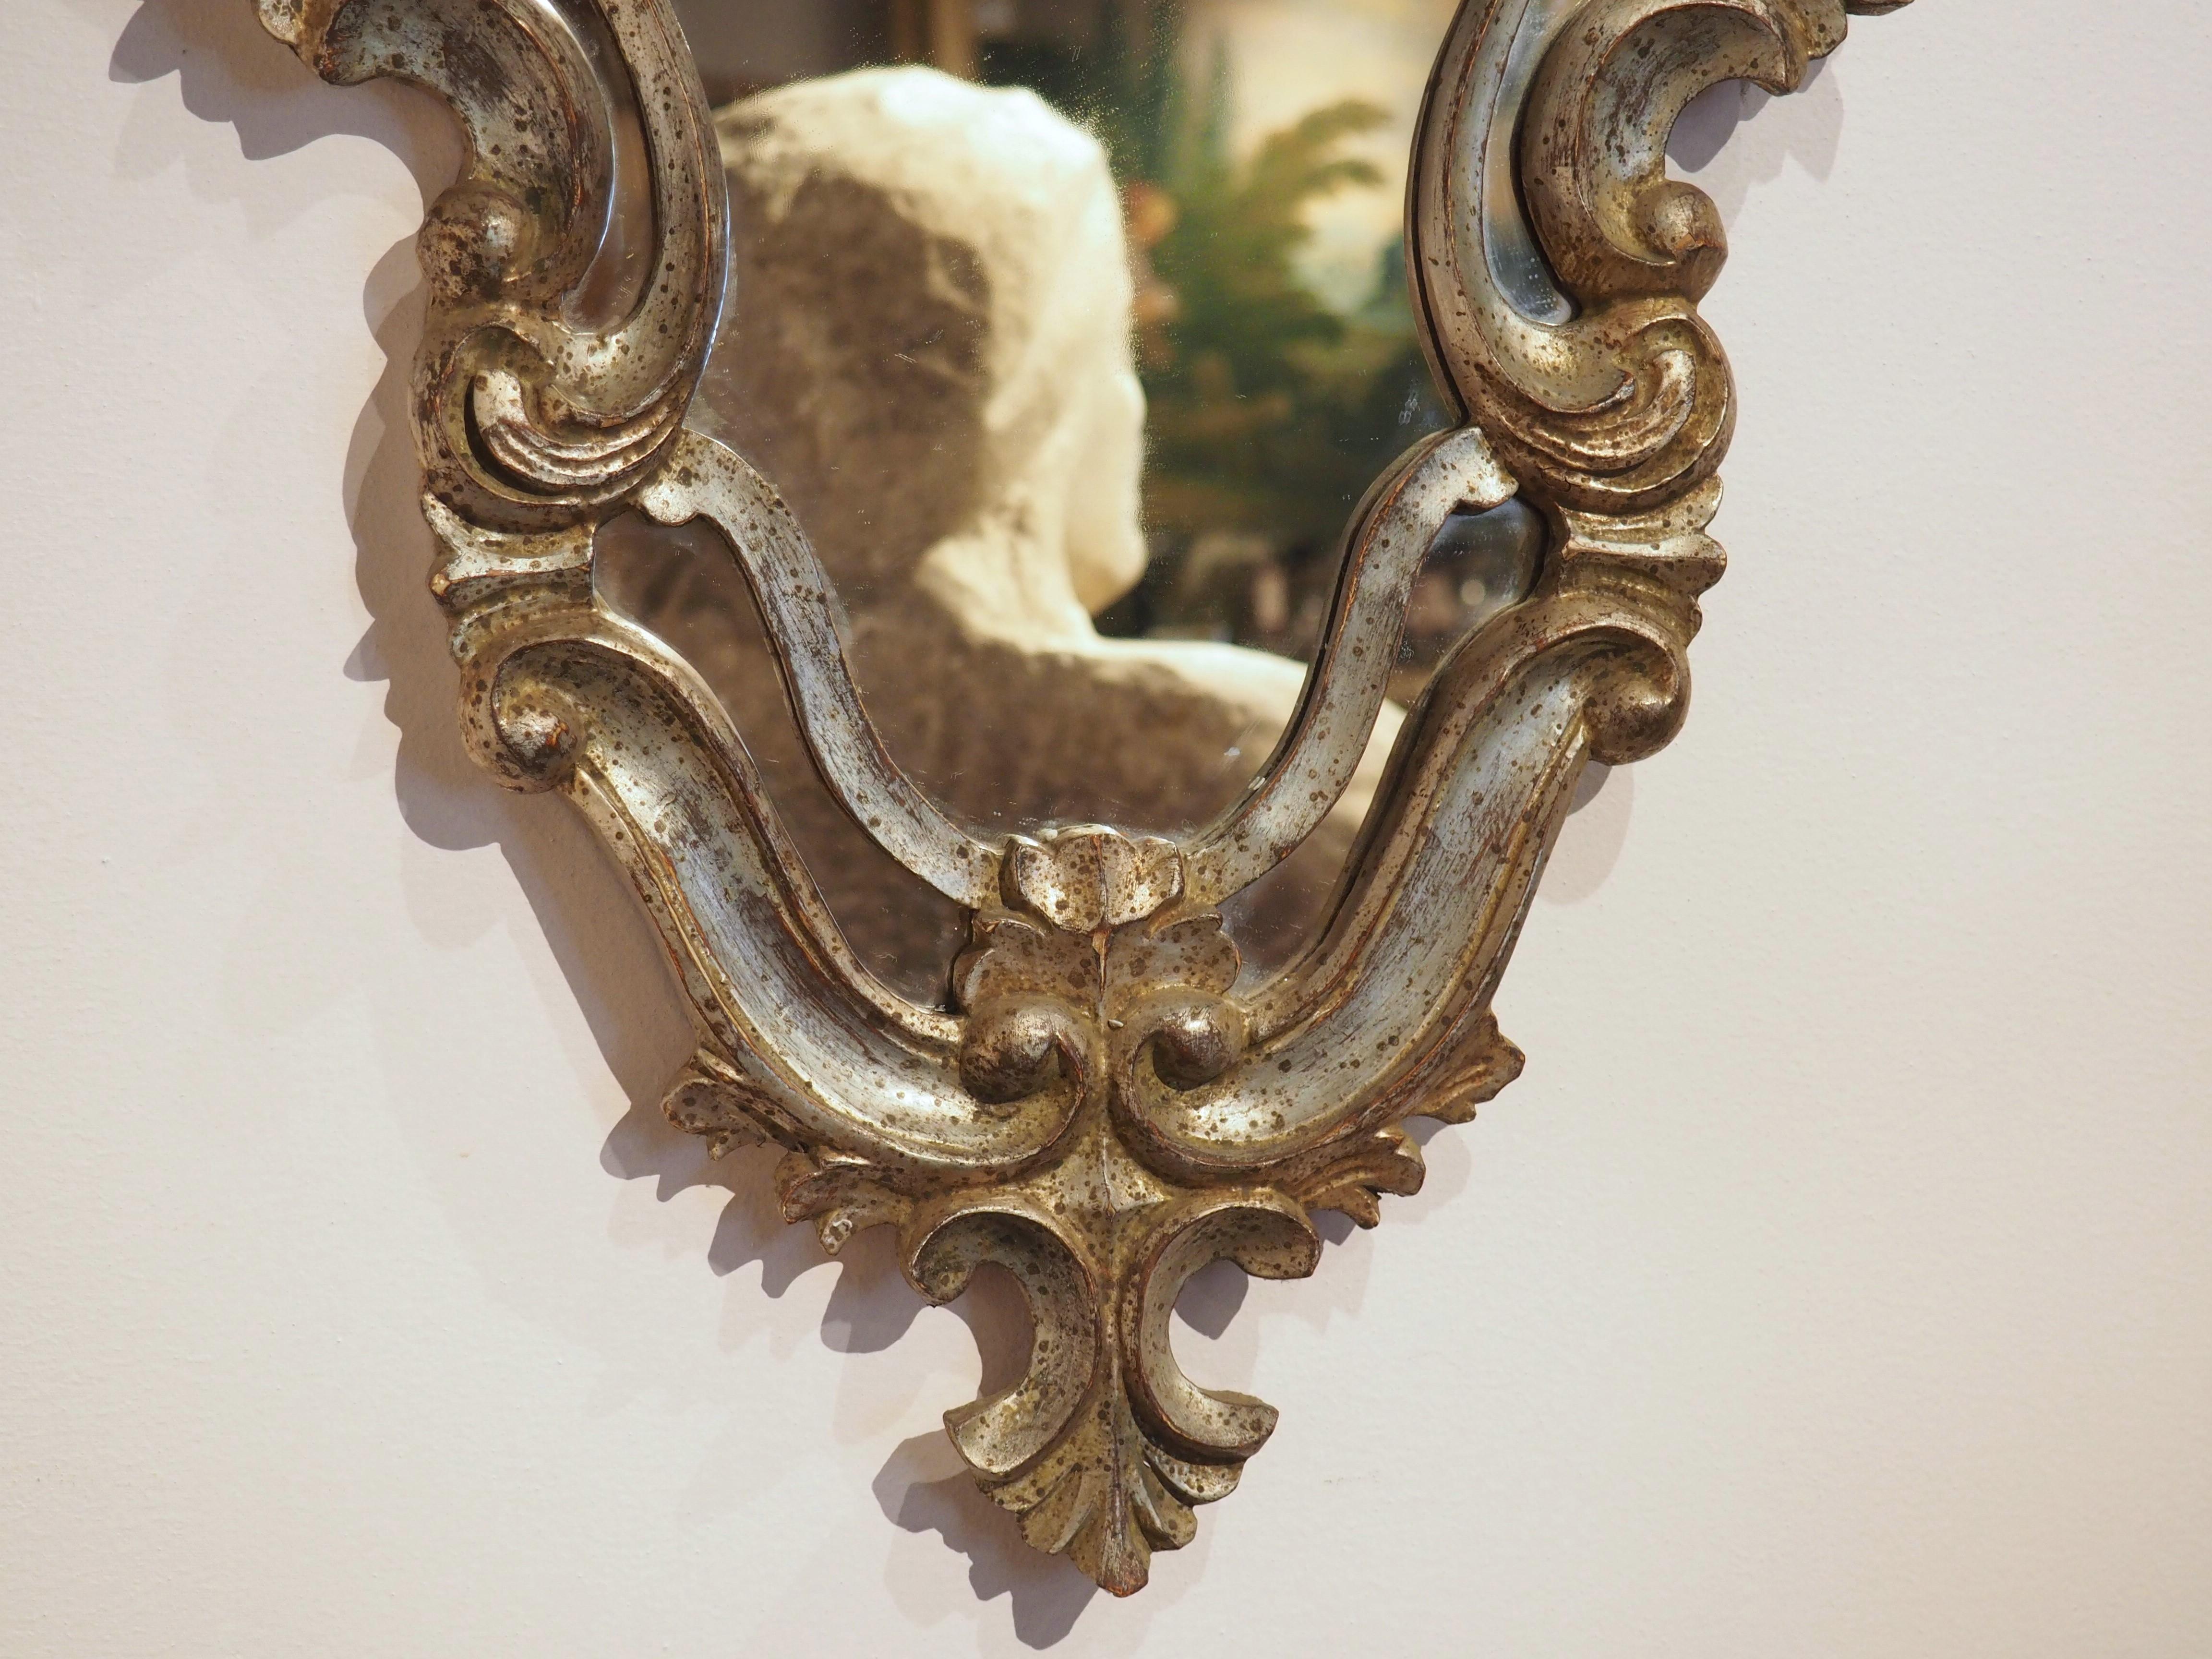 Add a touch of timeless elegance to your home with this beautiful antique mirror from Italy. Dating back to the 1920s, this 32-inch tall giltwood Venetian-style mirror has a silver and gold coloration that is chic, classic, and sure to make an